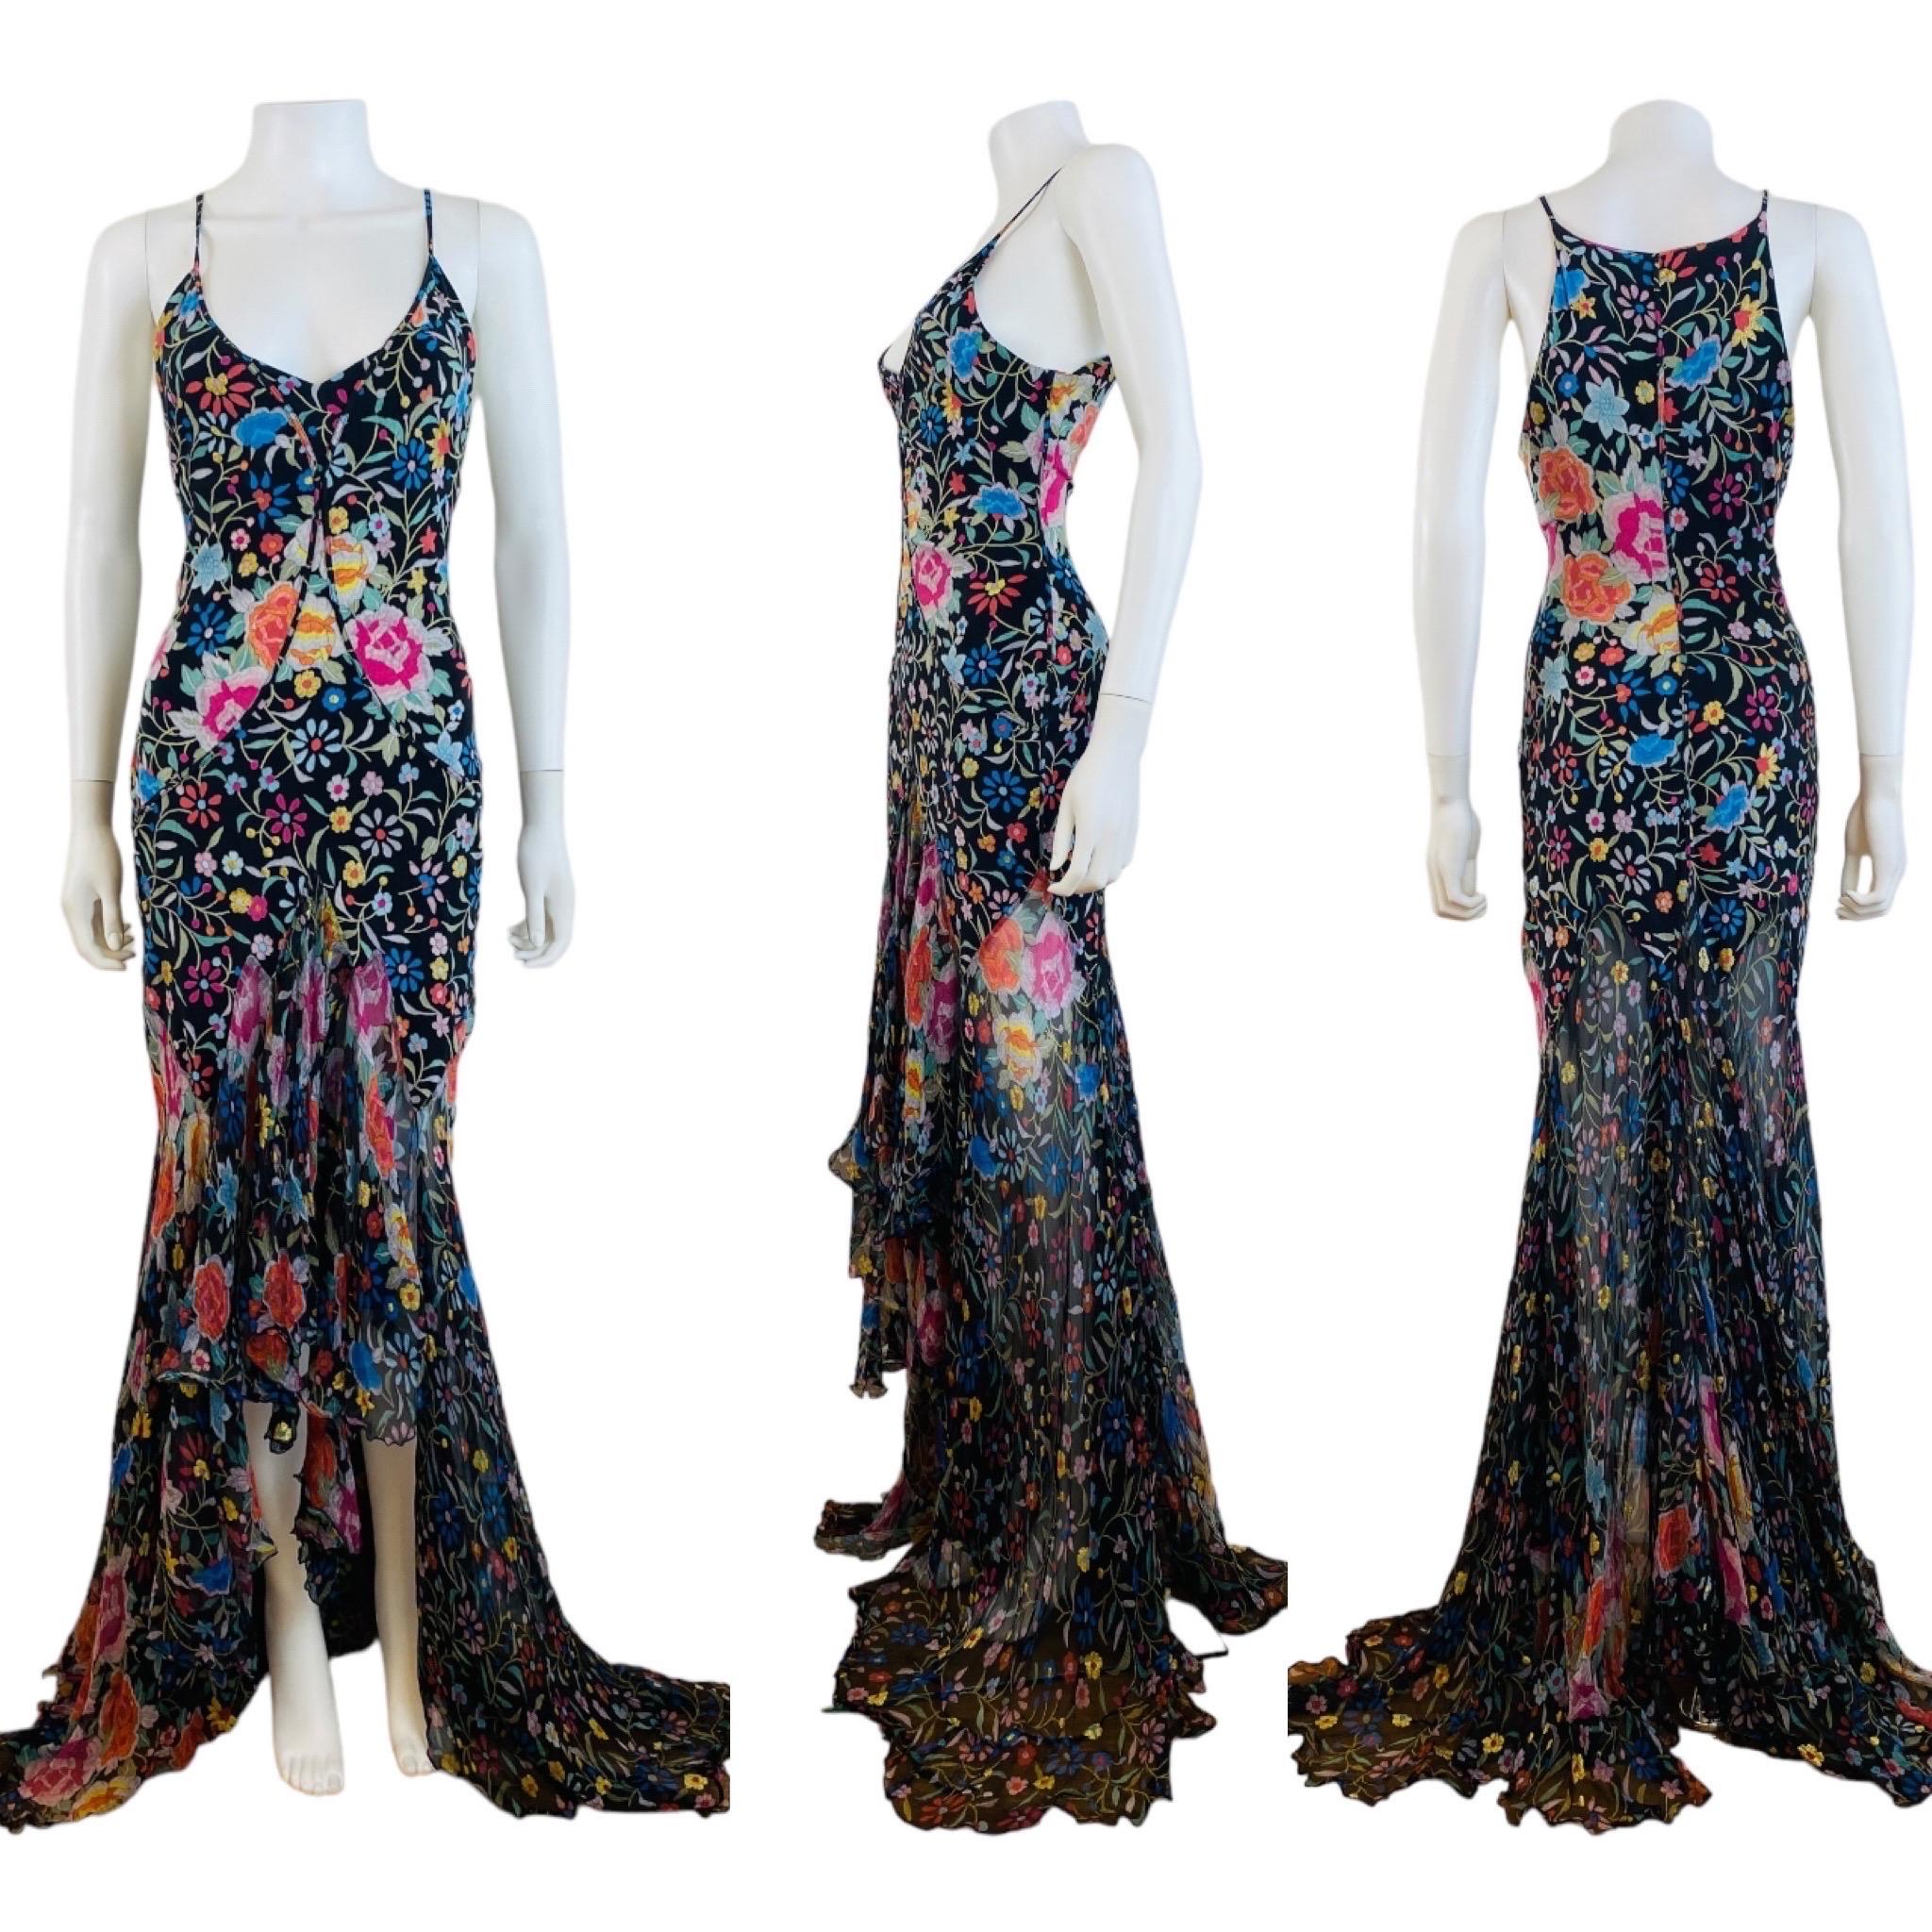 Vintage Roberto Cavalli F/W 2004 Floral Embroidered Look Hi Lo Hem Dress Gown In Excellent Condition For Sale In Denver, CO